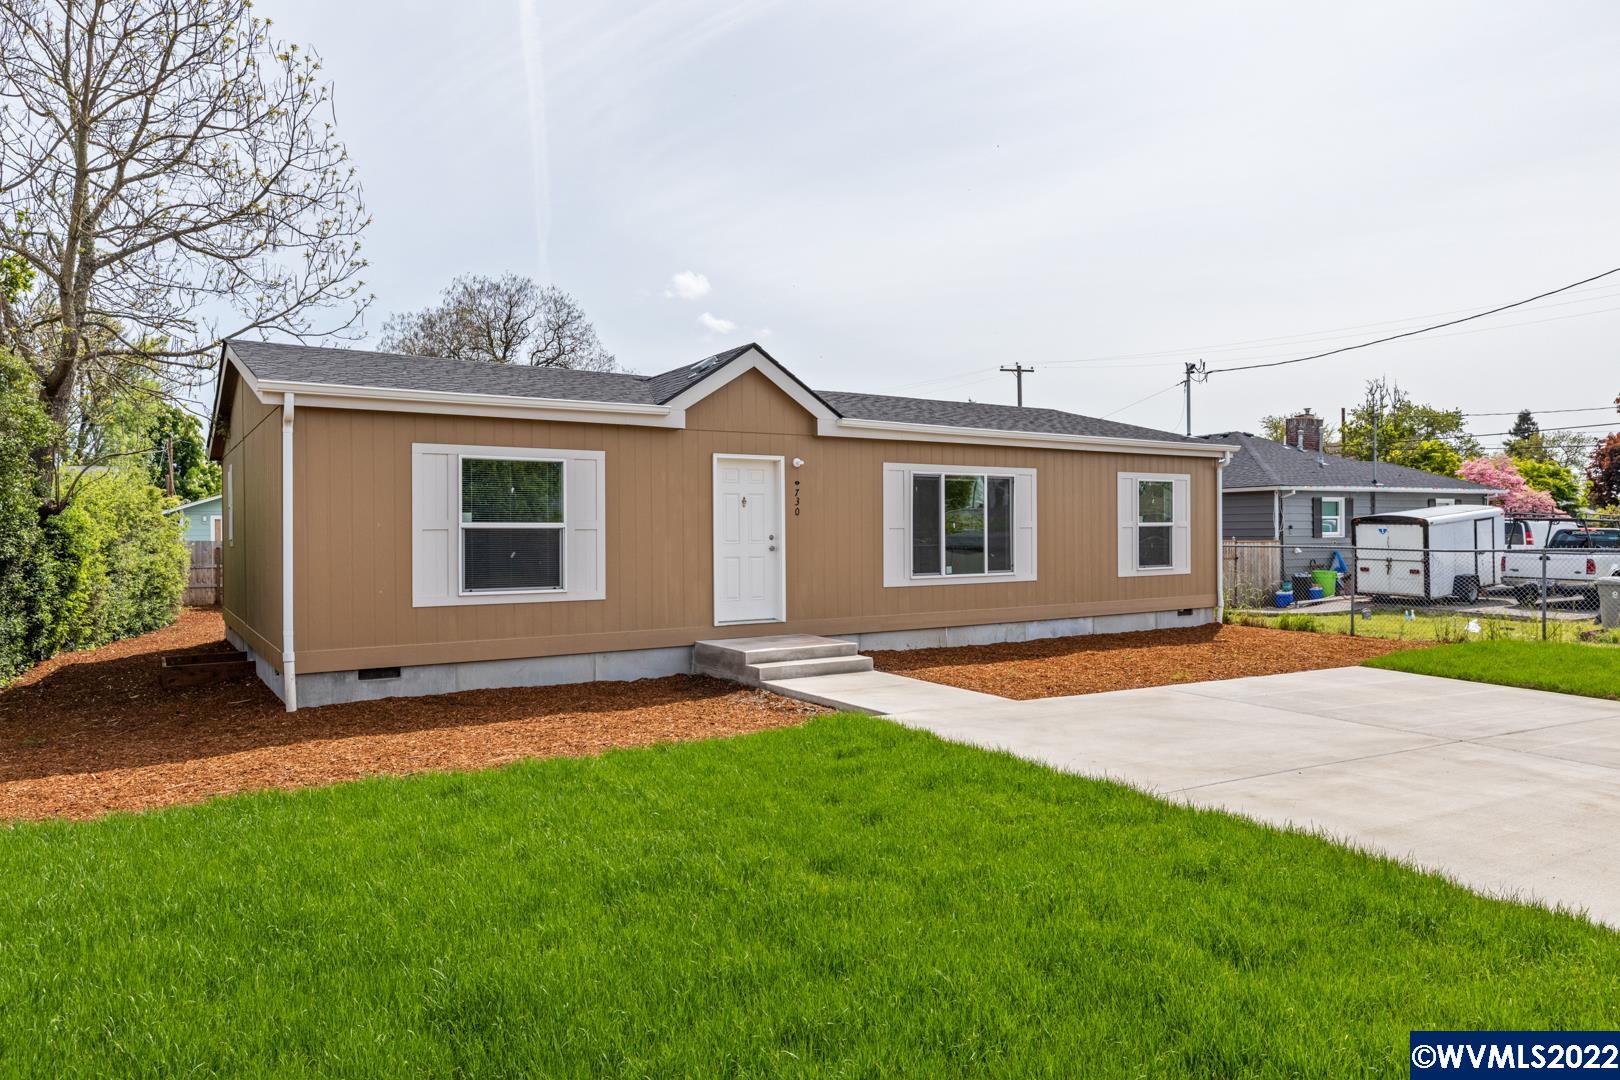 Centrally located in Albany on a quiet dead end street, come see this brand new, 3 bed 2 bath 1,279 square foot manufactured home. With a spacious living room and open concept kitchen, it will make a great space for entertaining. Out front a concrete driveway, & the backyard has a nicely sized patio, plenty of room for garden beds or other projects! Final touch ups/sheetrock/carpet etc.to be completed before closing, new buyer will receive manufacturer's warranty,Seller is licensed broker in state of Oregon